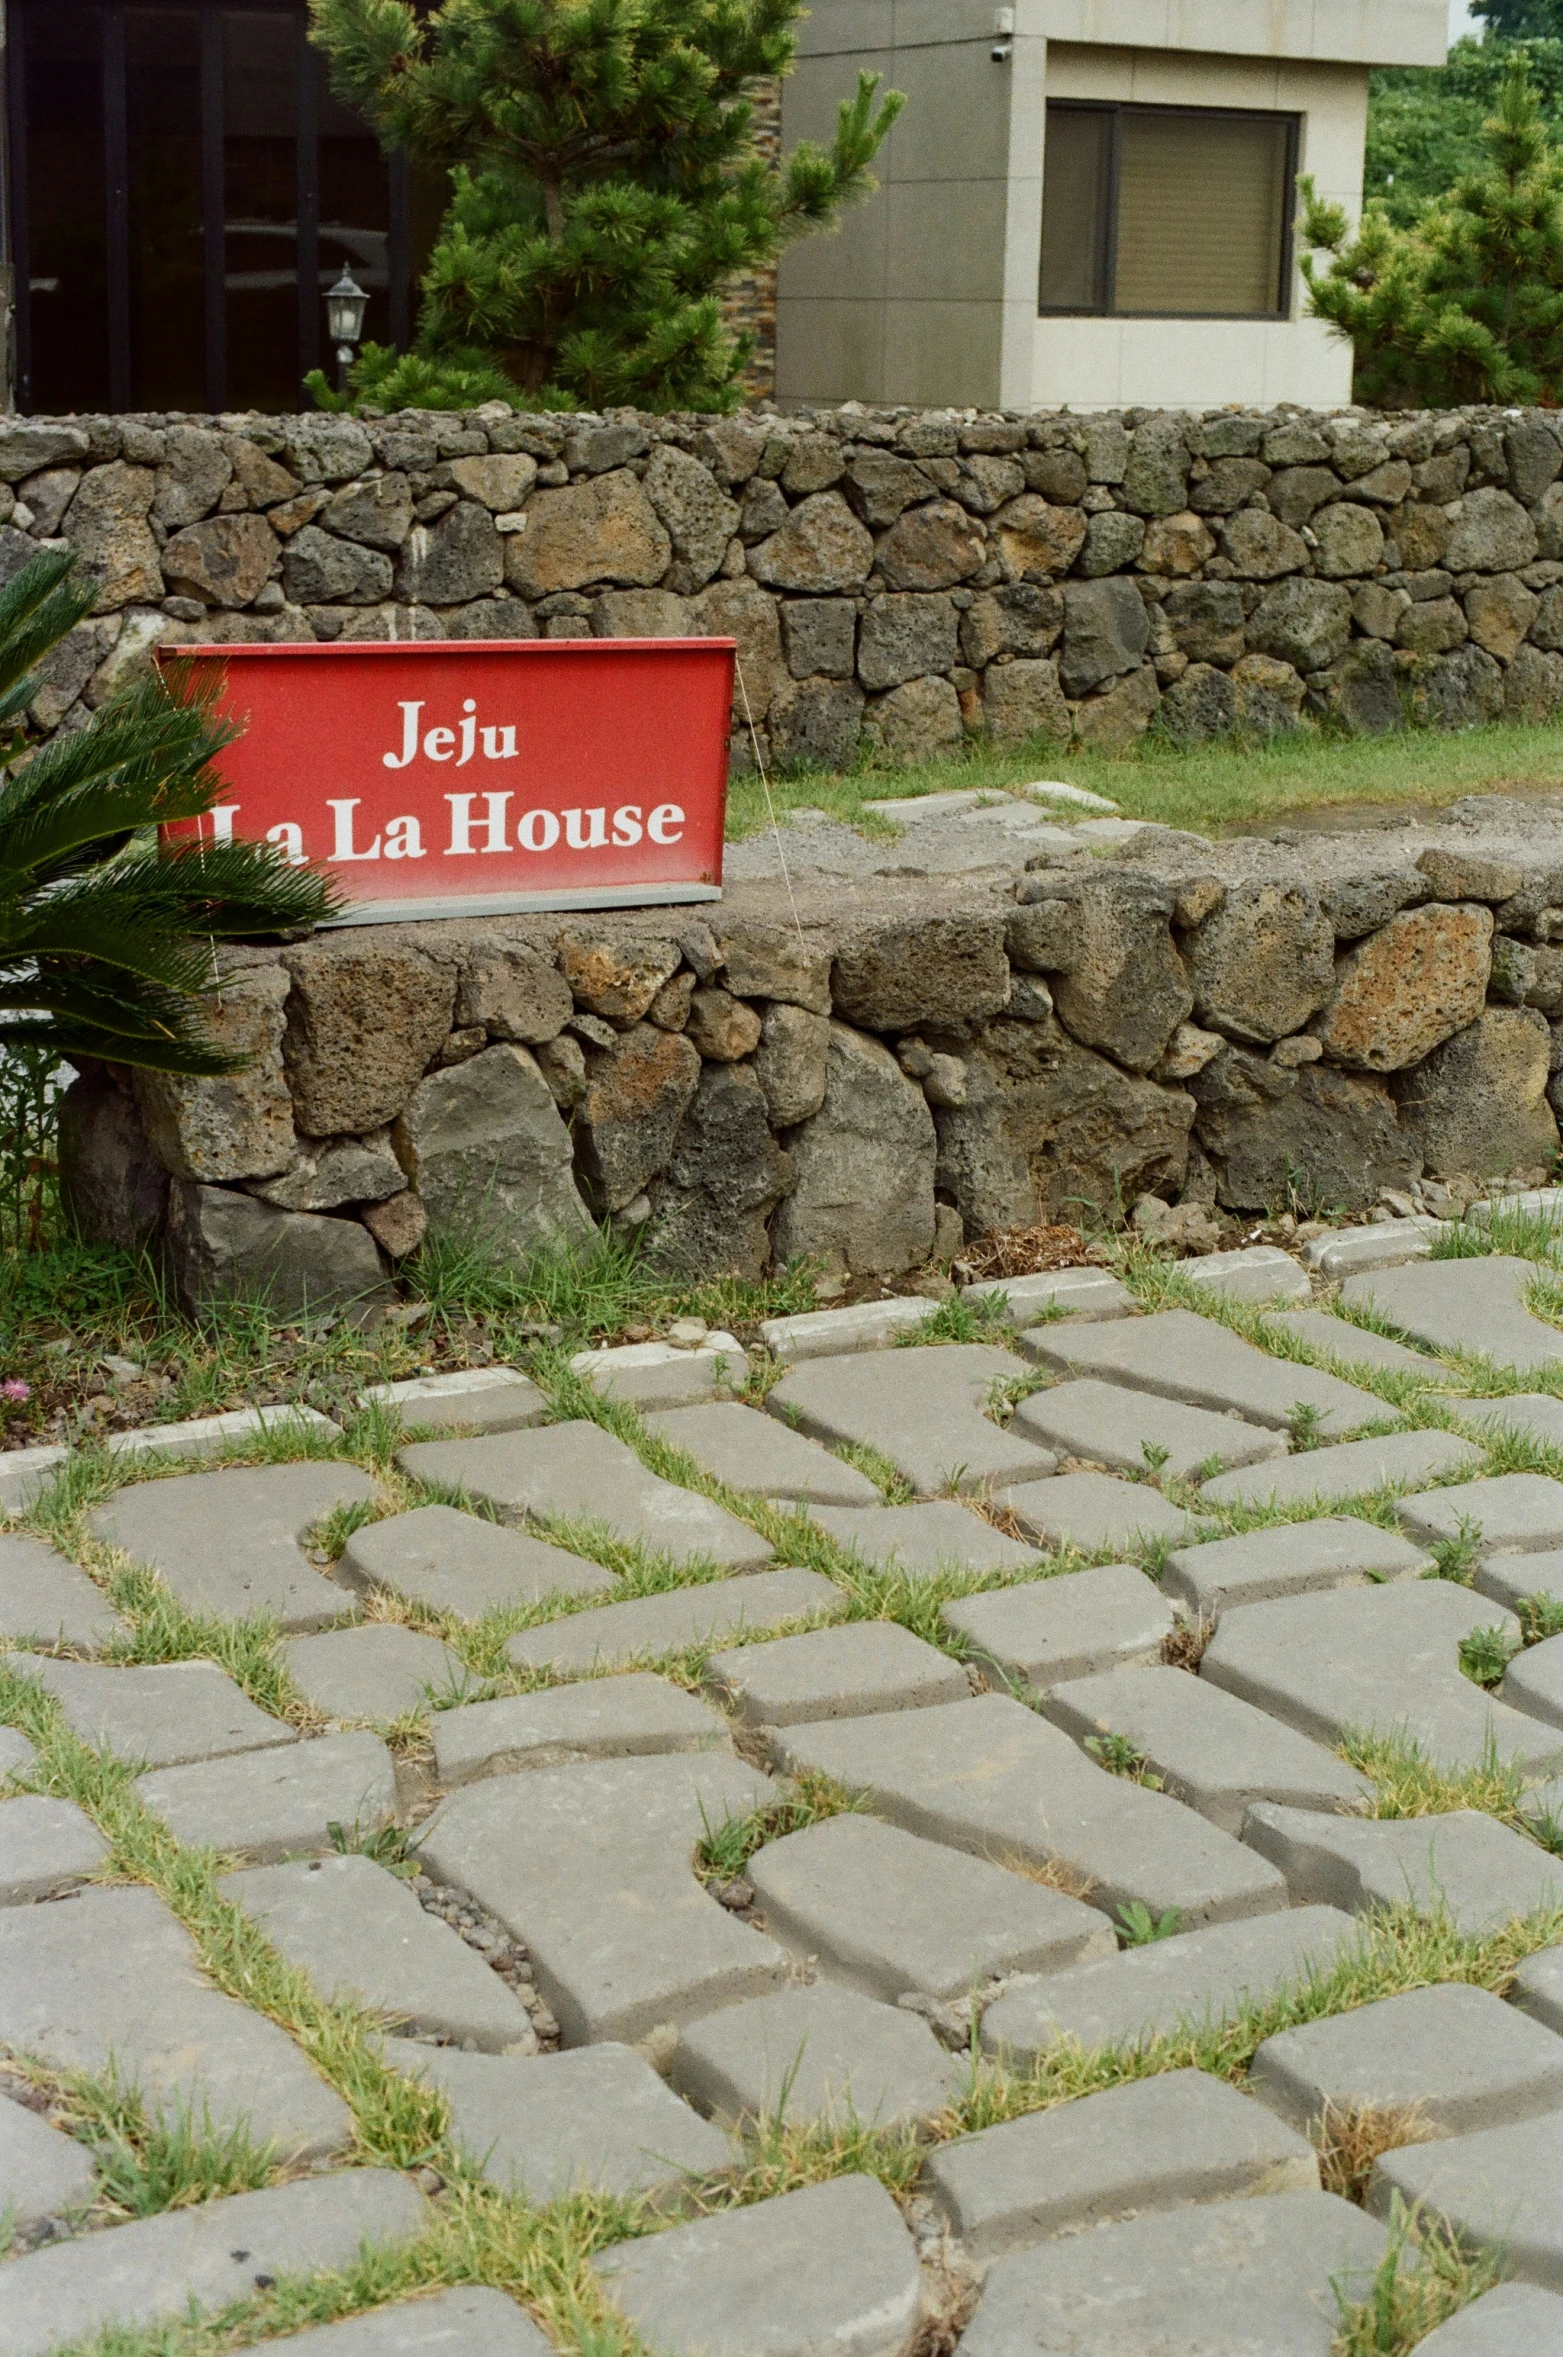 the entrance of an old stone building has a red sign saying